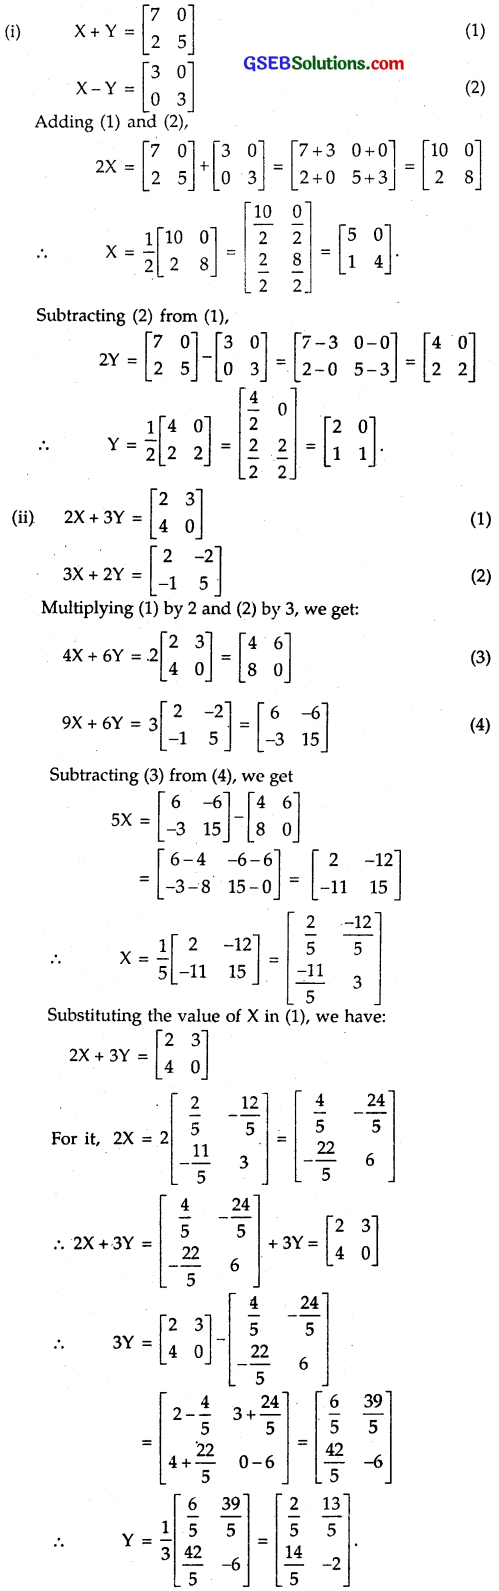 GSEB Solutions Class 12 Maths Chapter 3 Matrices Ex 3.2 8